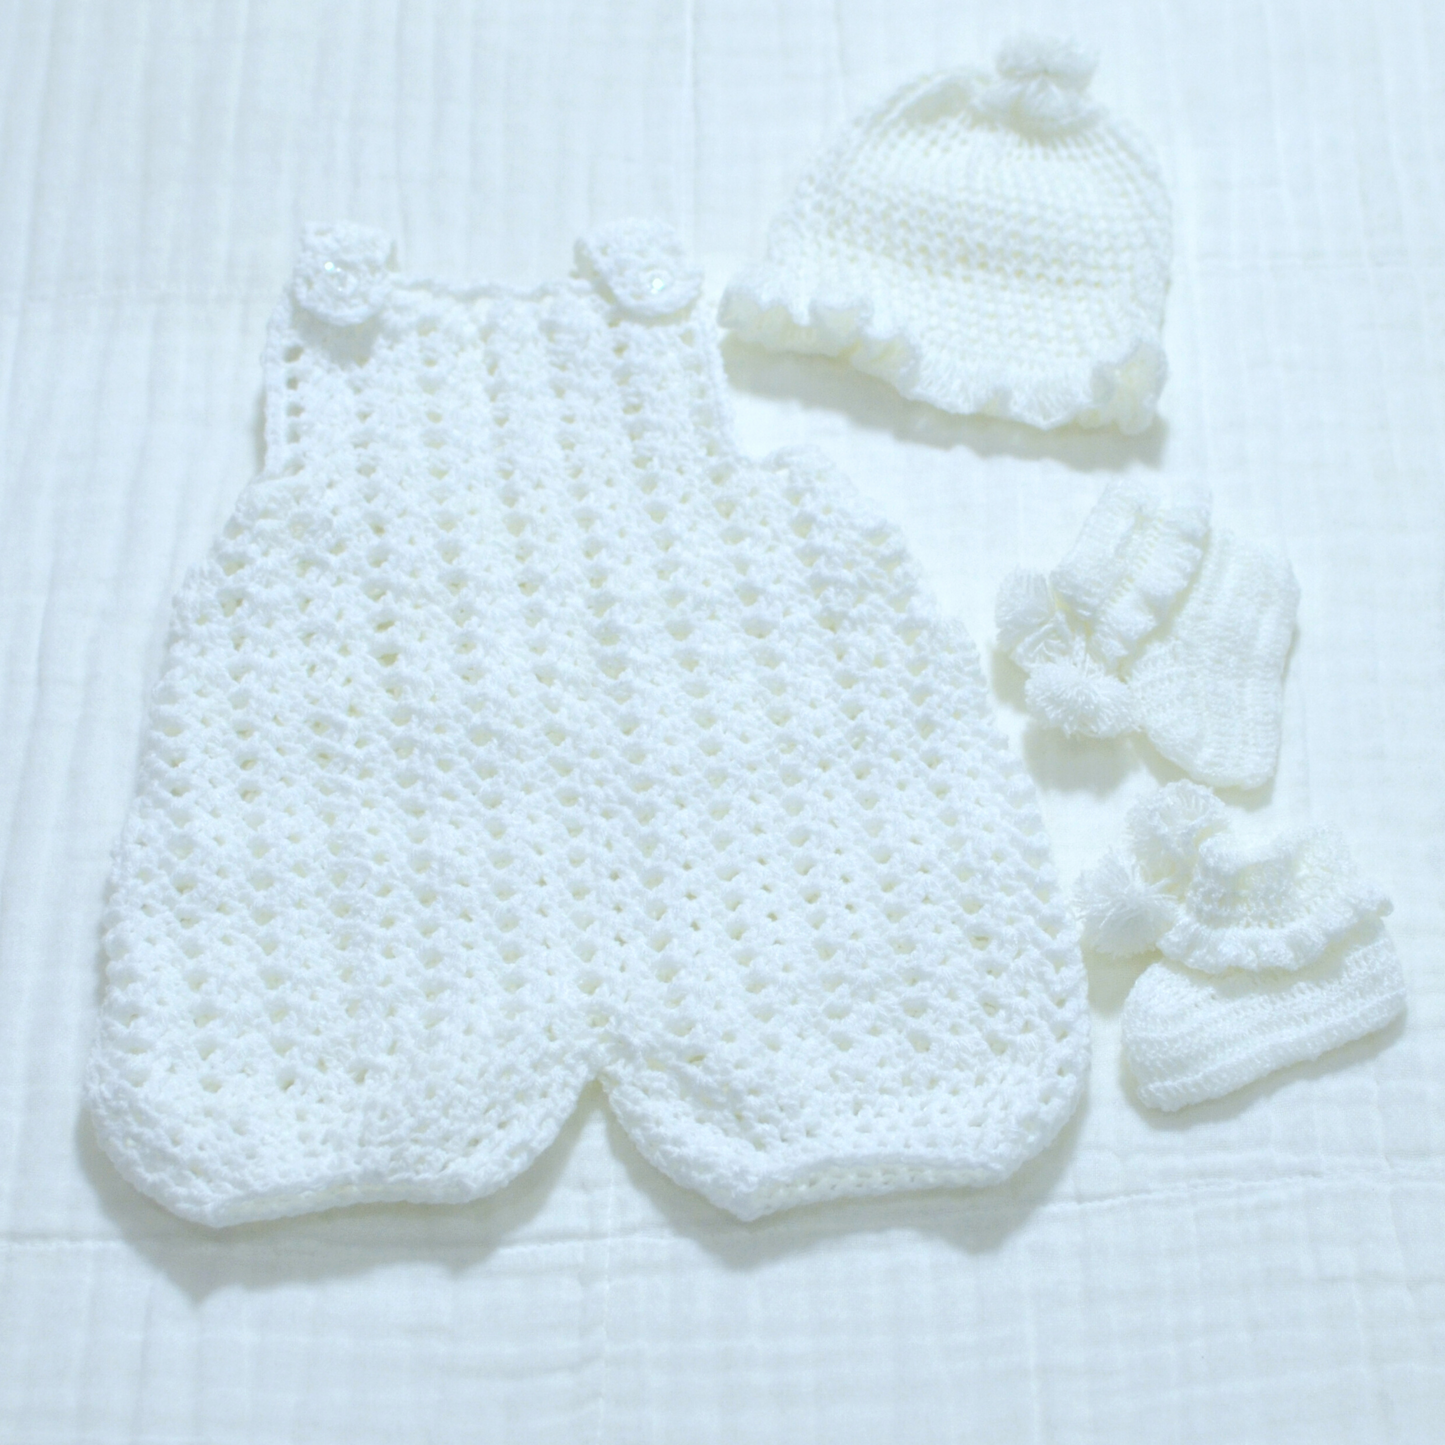 Crochet Baby Dungaree and Hat Socks - 0 to 3 month size